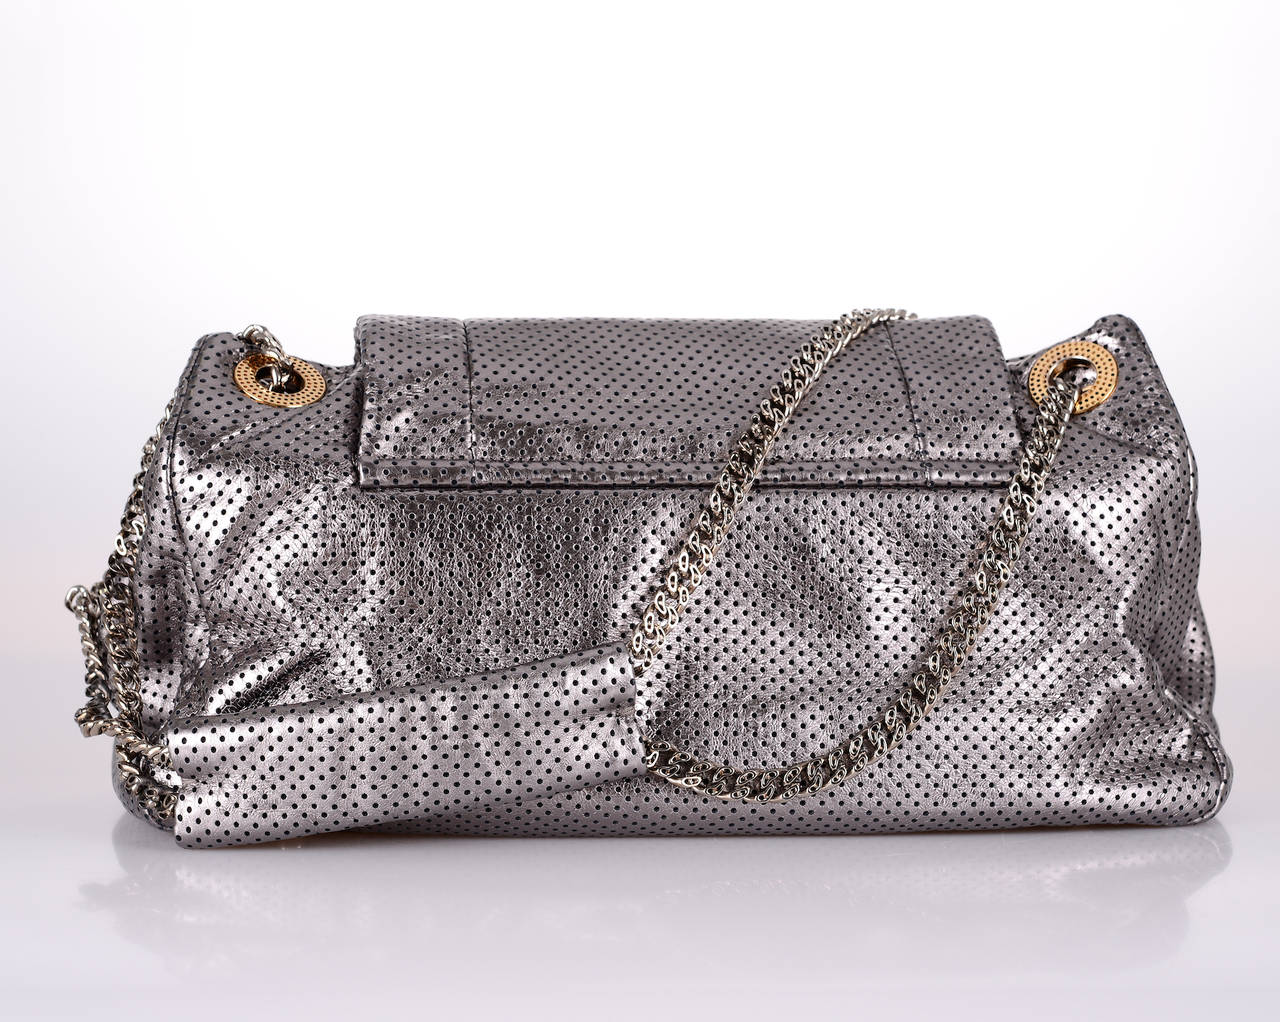 CHANEL PERFORATED METALLIC  LIGHT AS A FEATHER TOTE. 

THE ULTIMATE BAG TO OWN! MAKE A STATEMENT WITHOUT SAYING A WORD…

THE BAG IS in absolute mint condition! COMES WITH A SLEEPER!

Measurements: 

Brand:
CHANEL
Bag